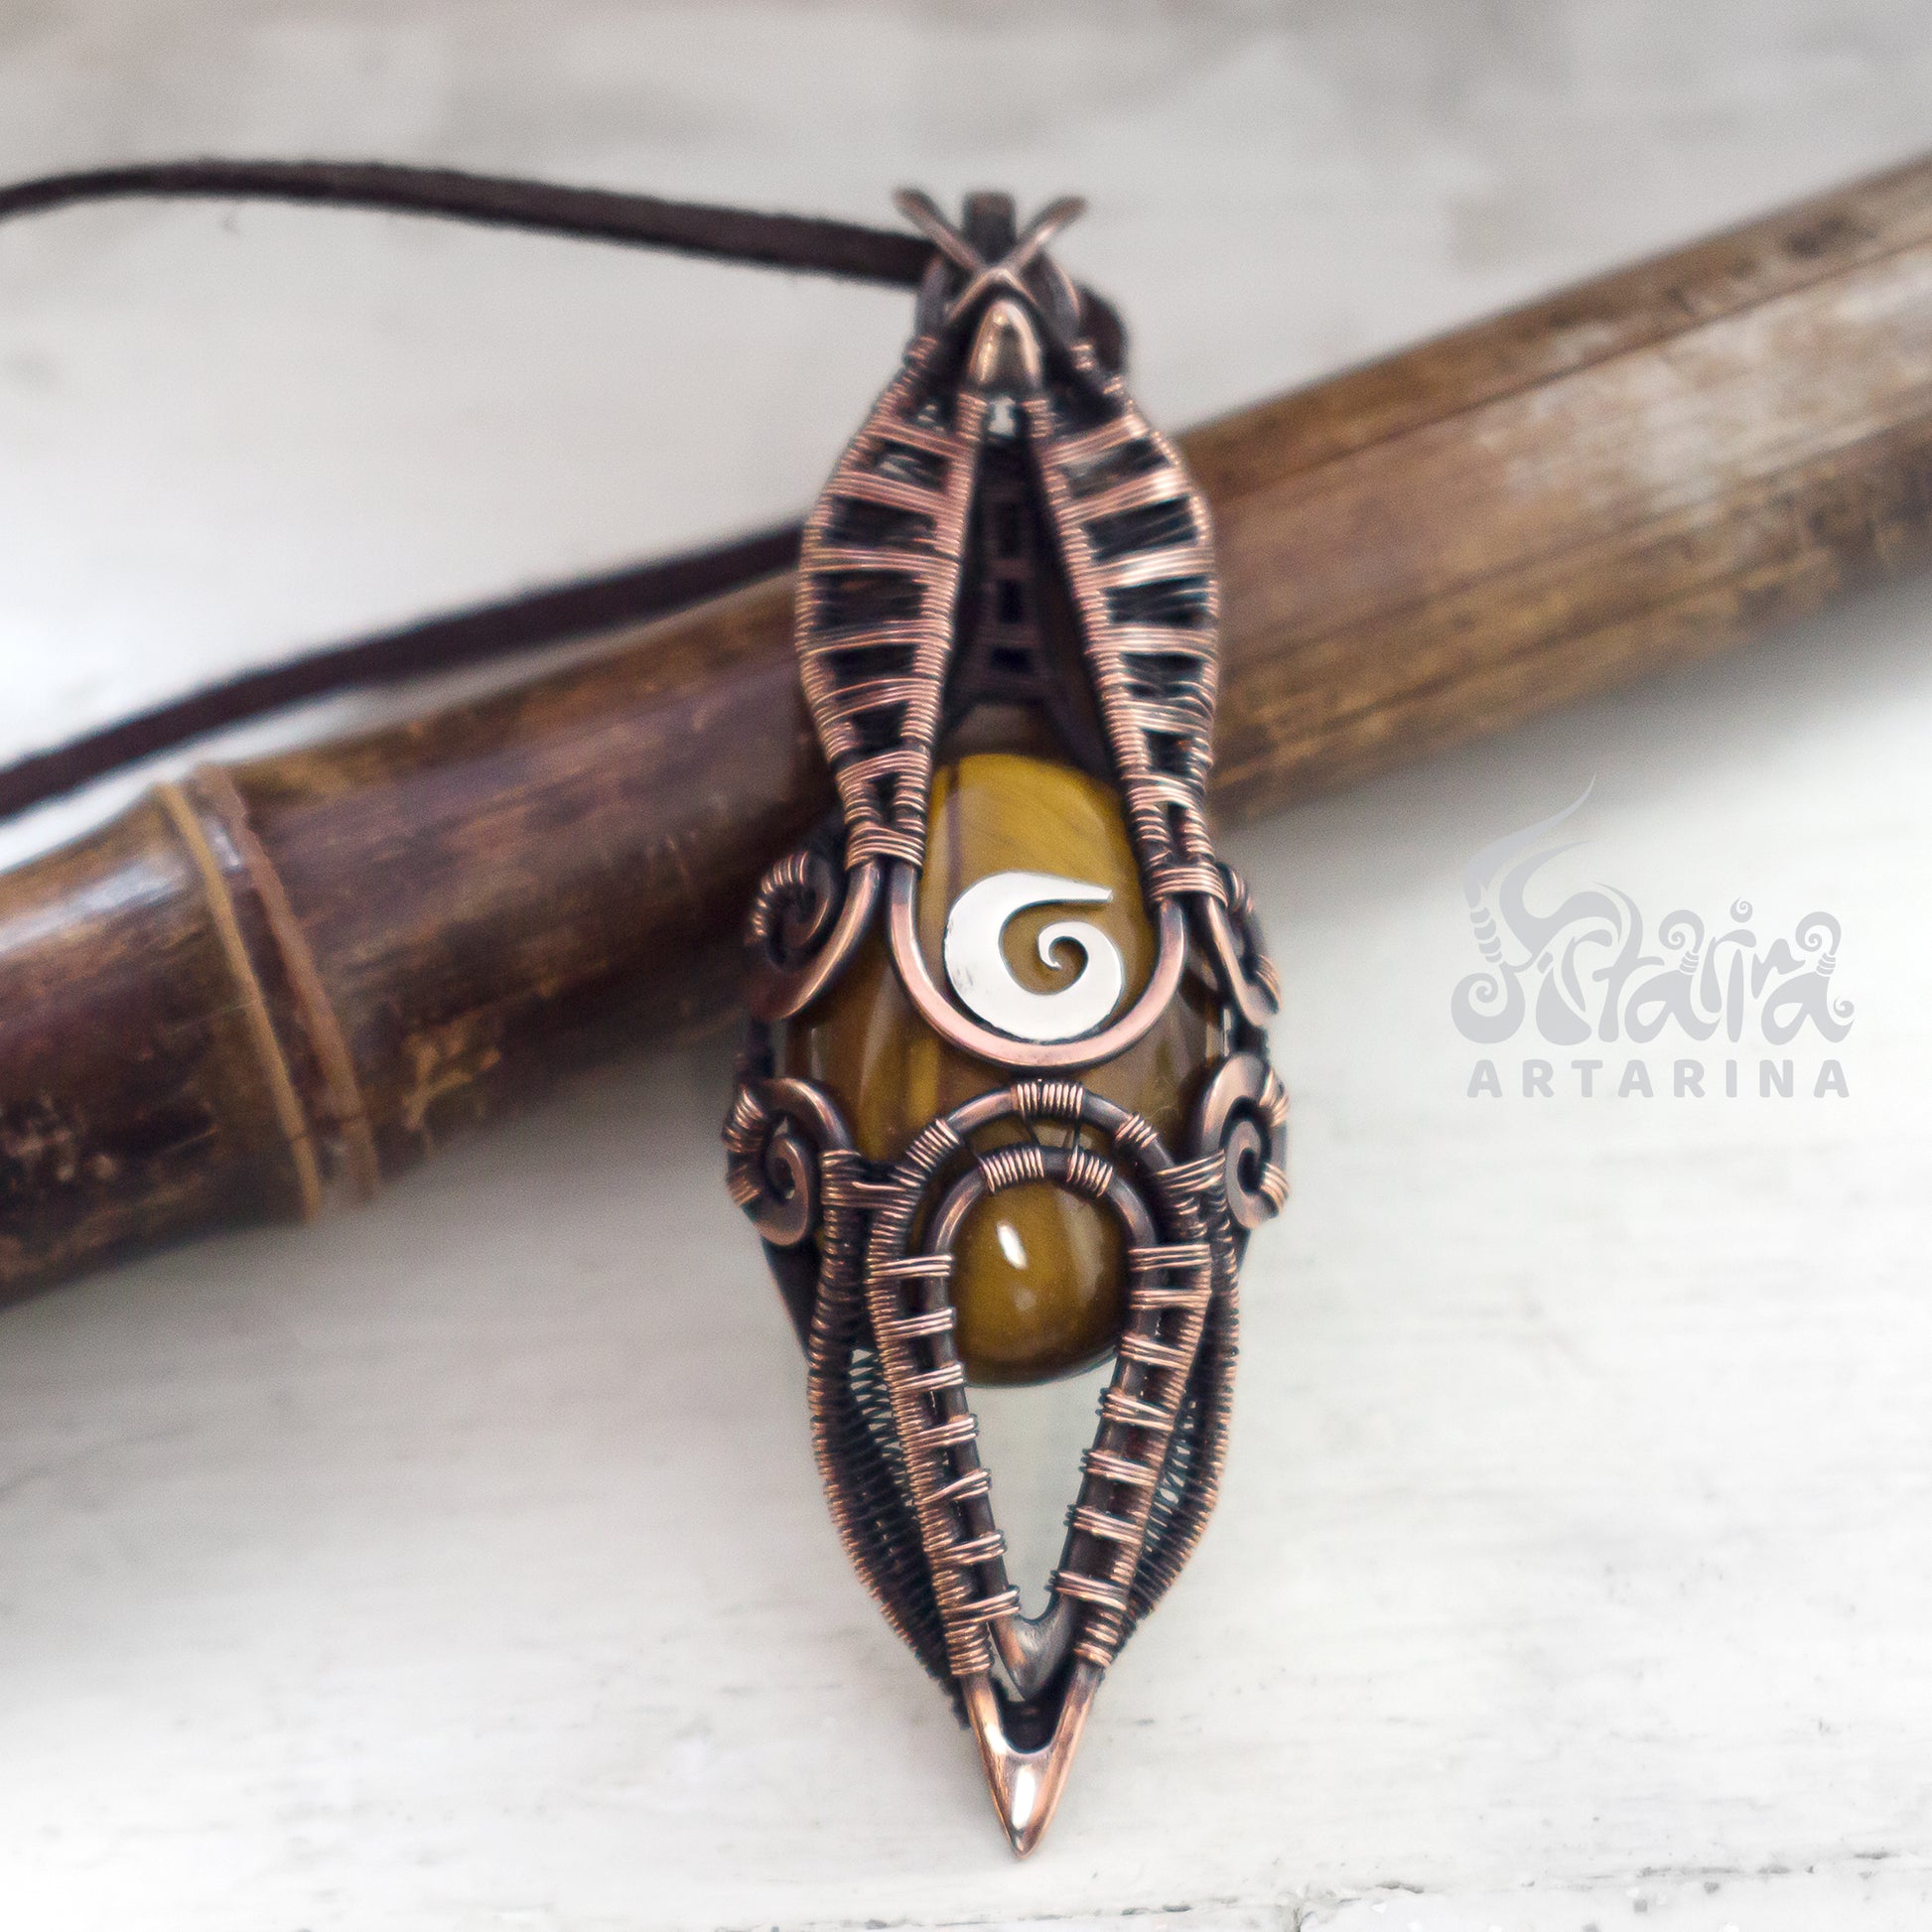 Handmade copper wire-wrapped necklace with a unique Tiger's Eye stone pendant pic1